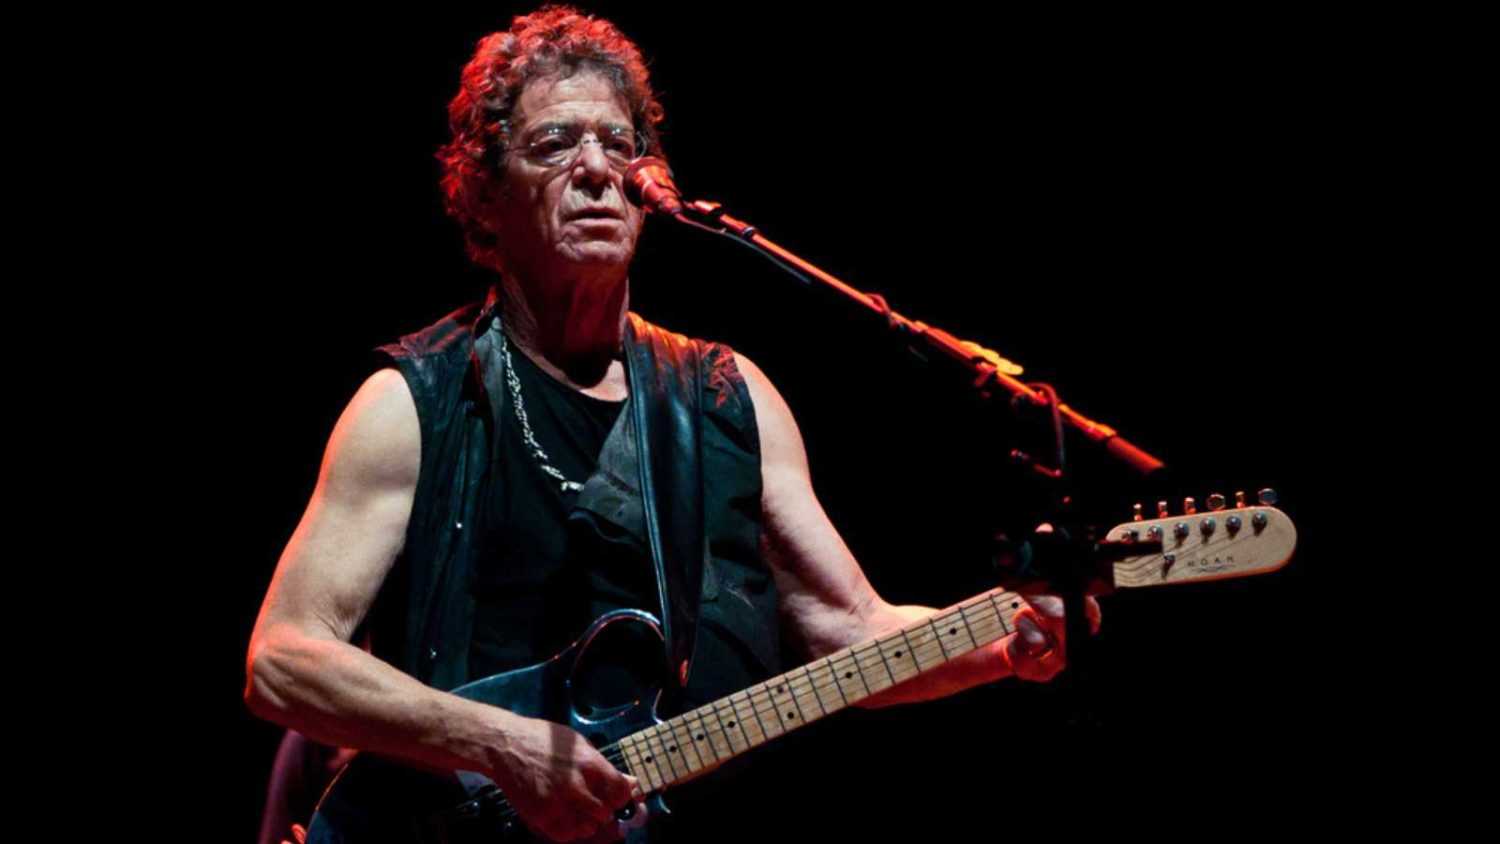 TRENCIN,SLOVAKIA - JULY 5:Lou Reed performs at the Pohoda Music Festival at the Trencin Airport in Trencin, Slovakia on July 5, 2012.